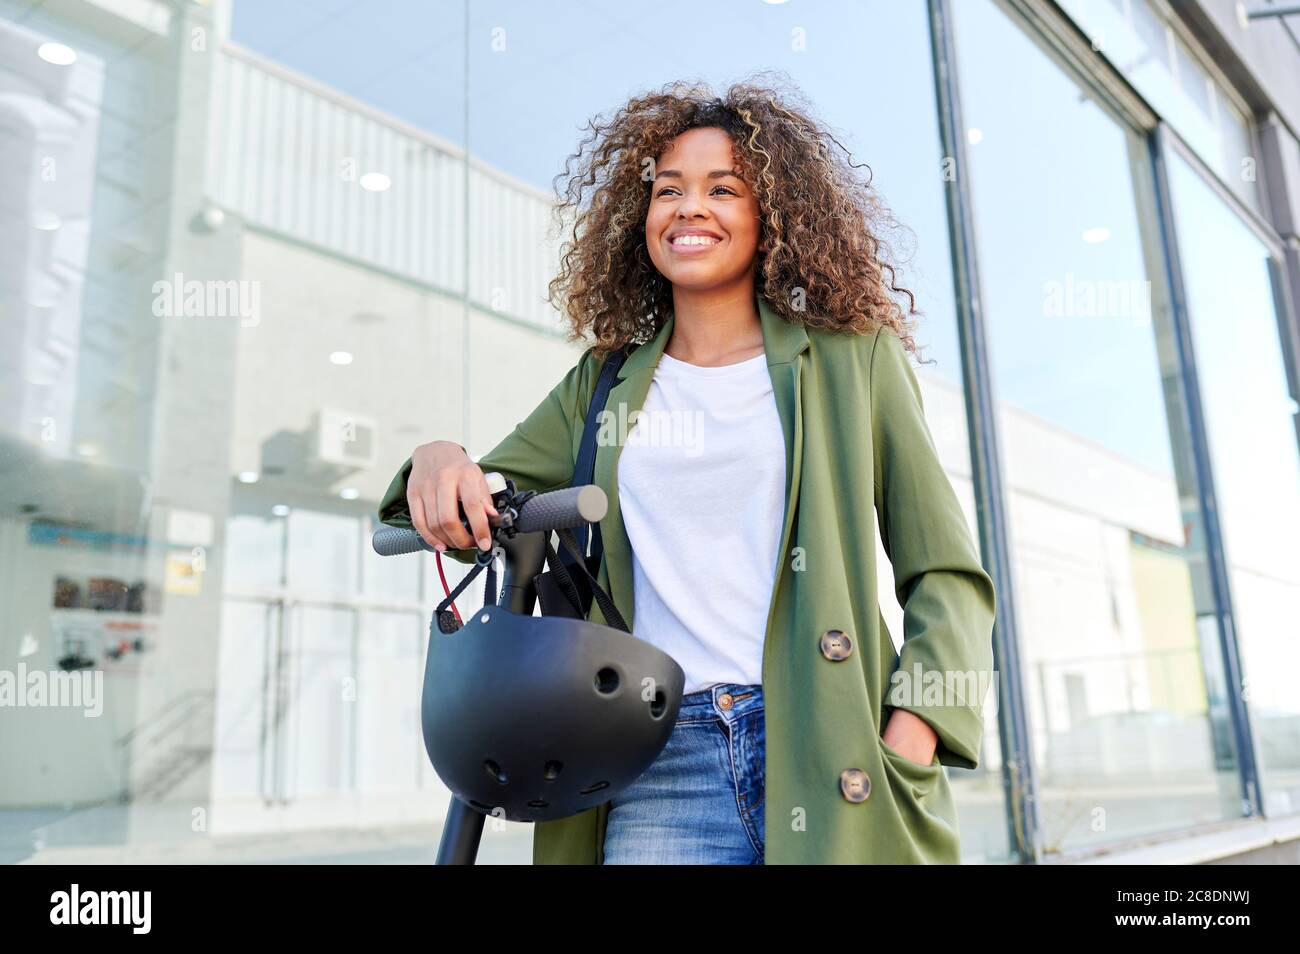 Thoughtful young woman smiling while standing with electric push scooter in city Stock Photo